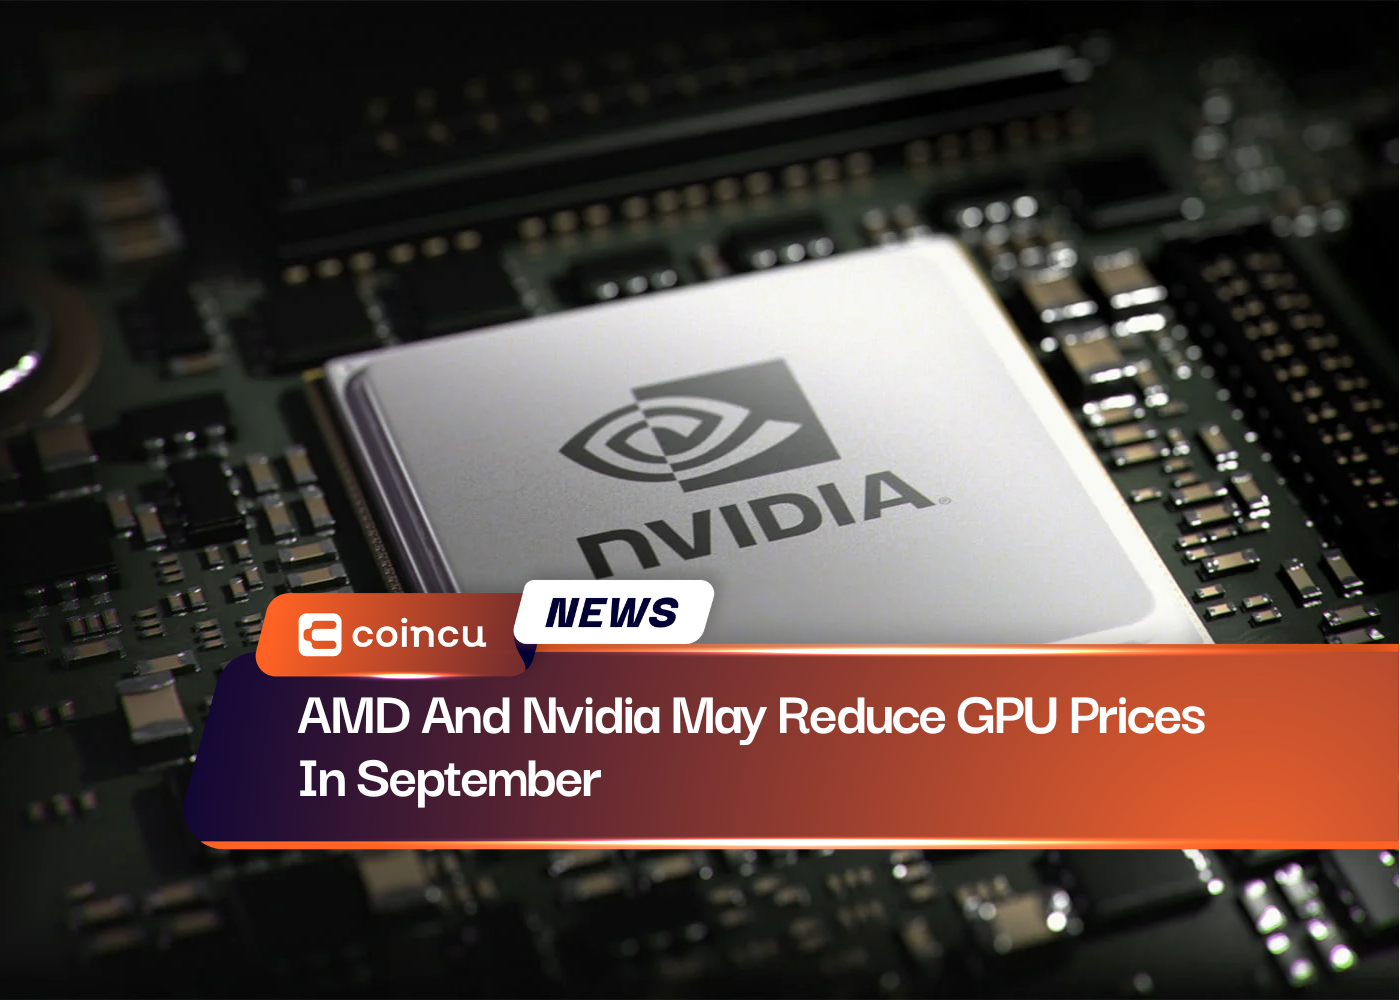 AMD And Nvidia May Reduce GPU Prices In September